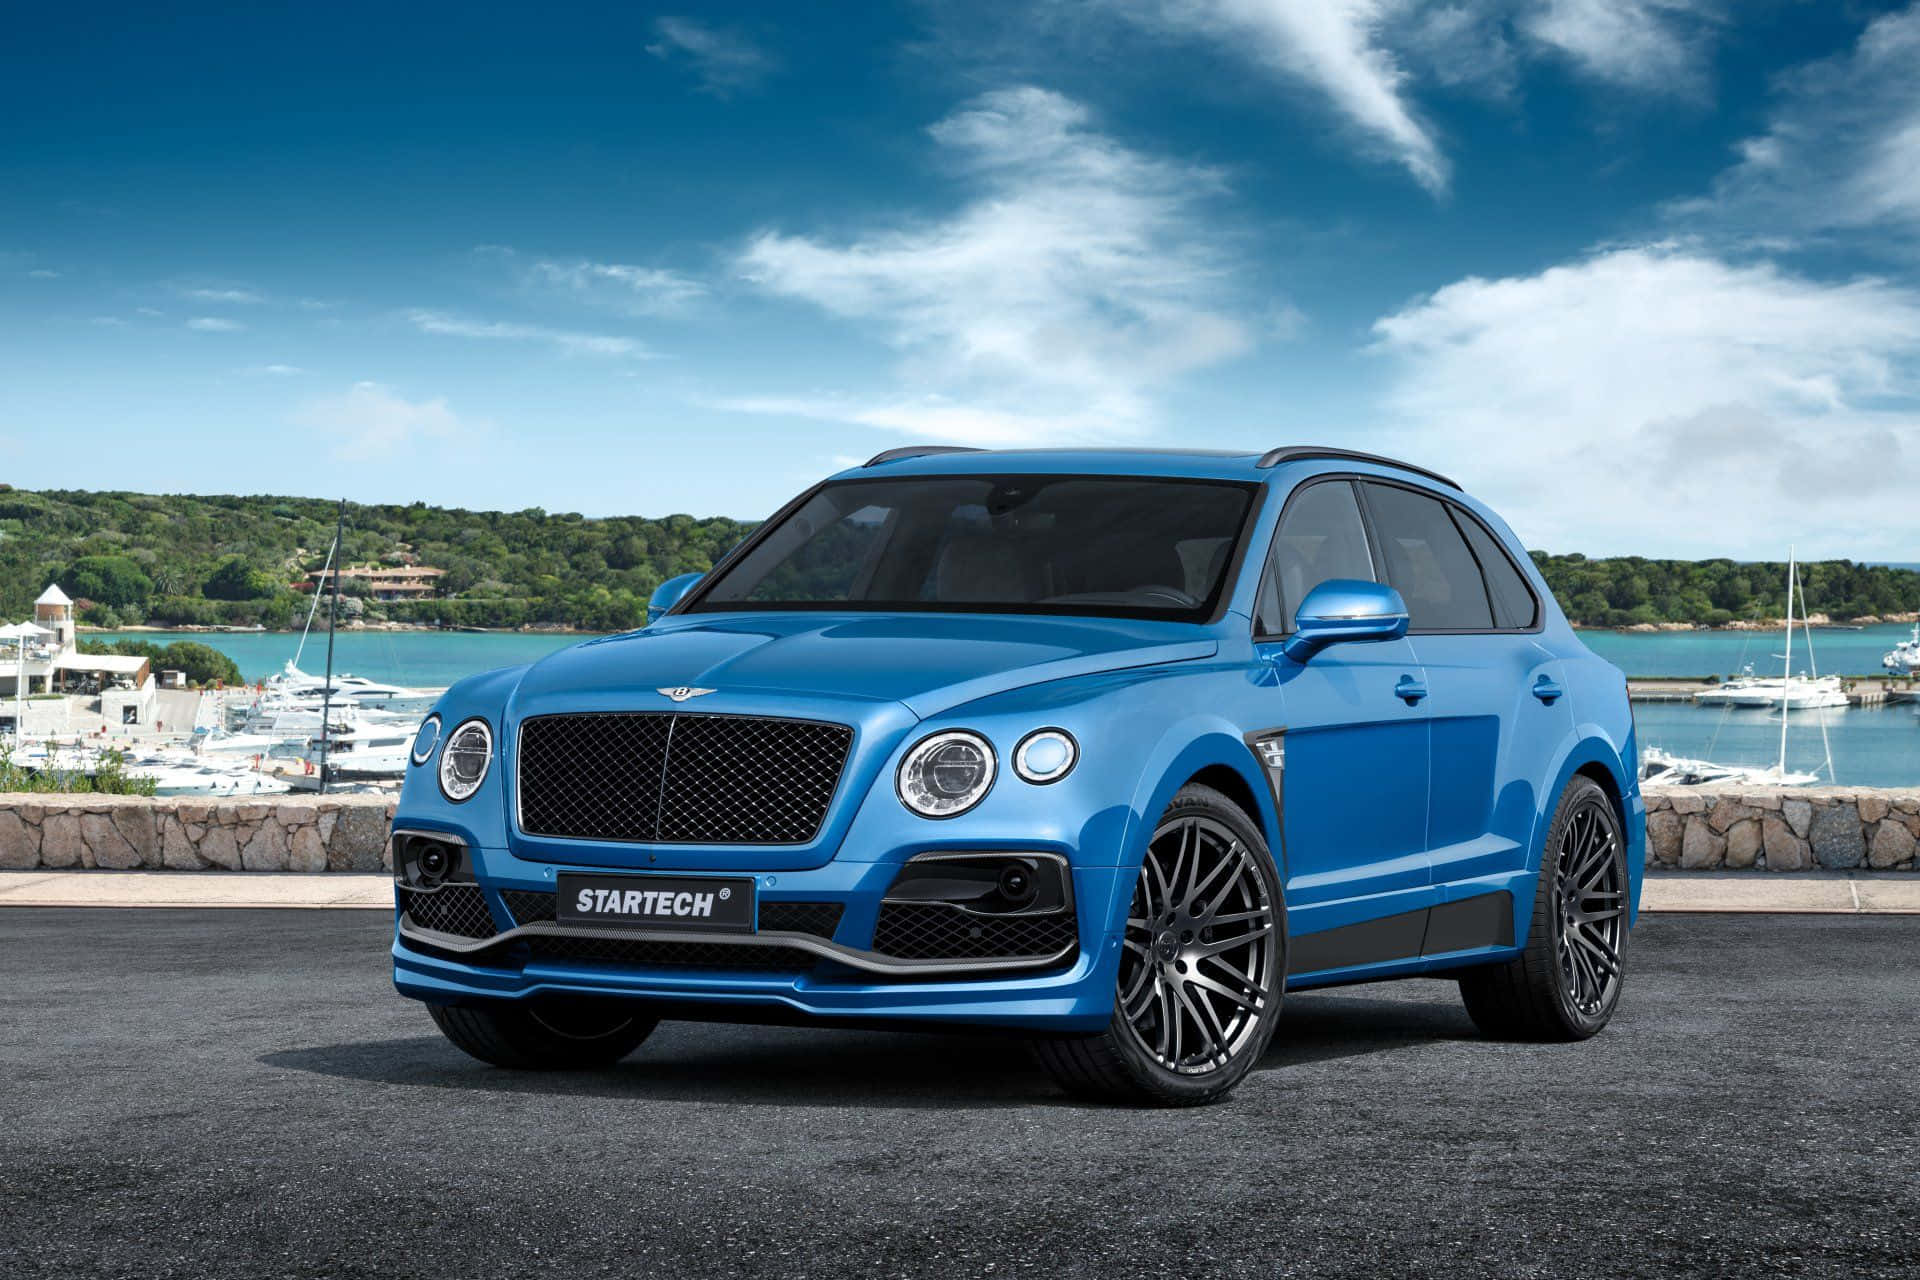 Bentley Bentayga - A Blue Suv Parked In Front Of A Marina